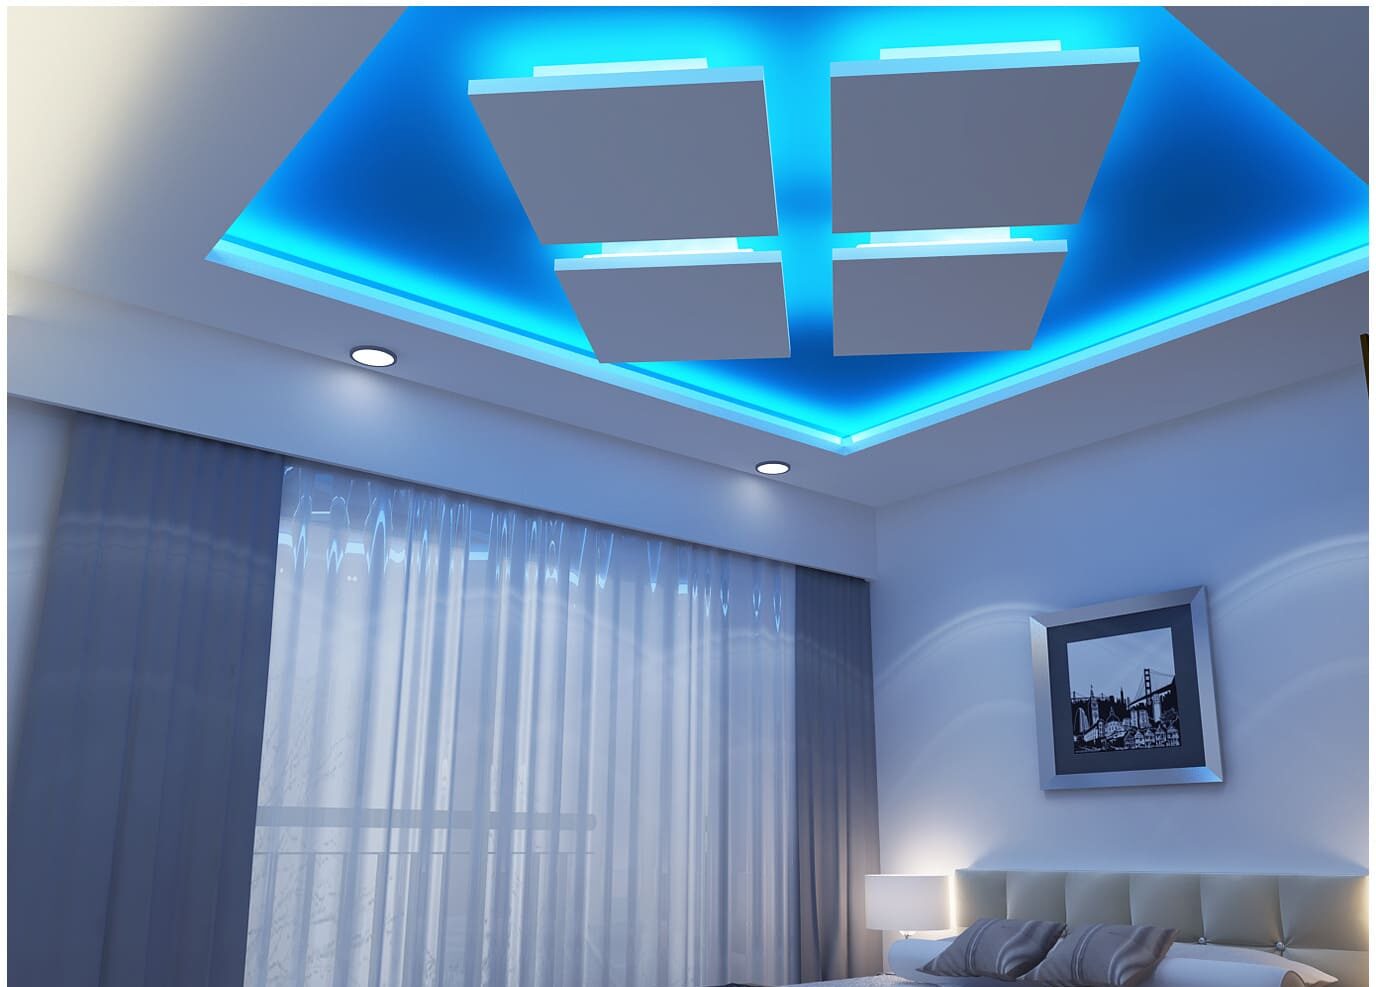 geometric shapes, false ceiling in bedroom, blue light, bed, curtains, white walls